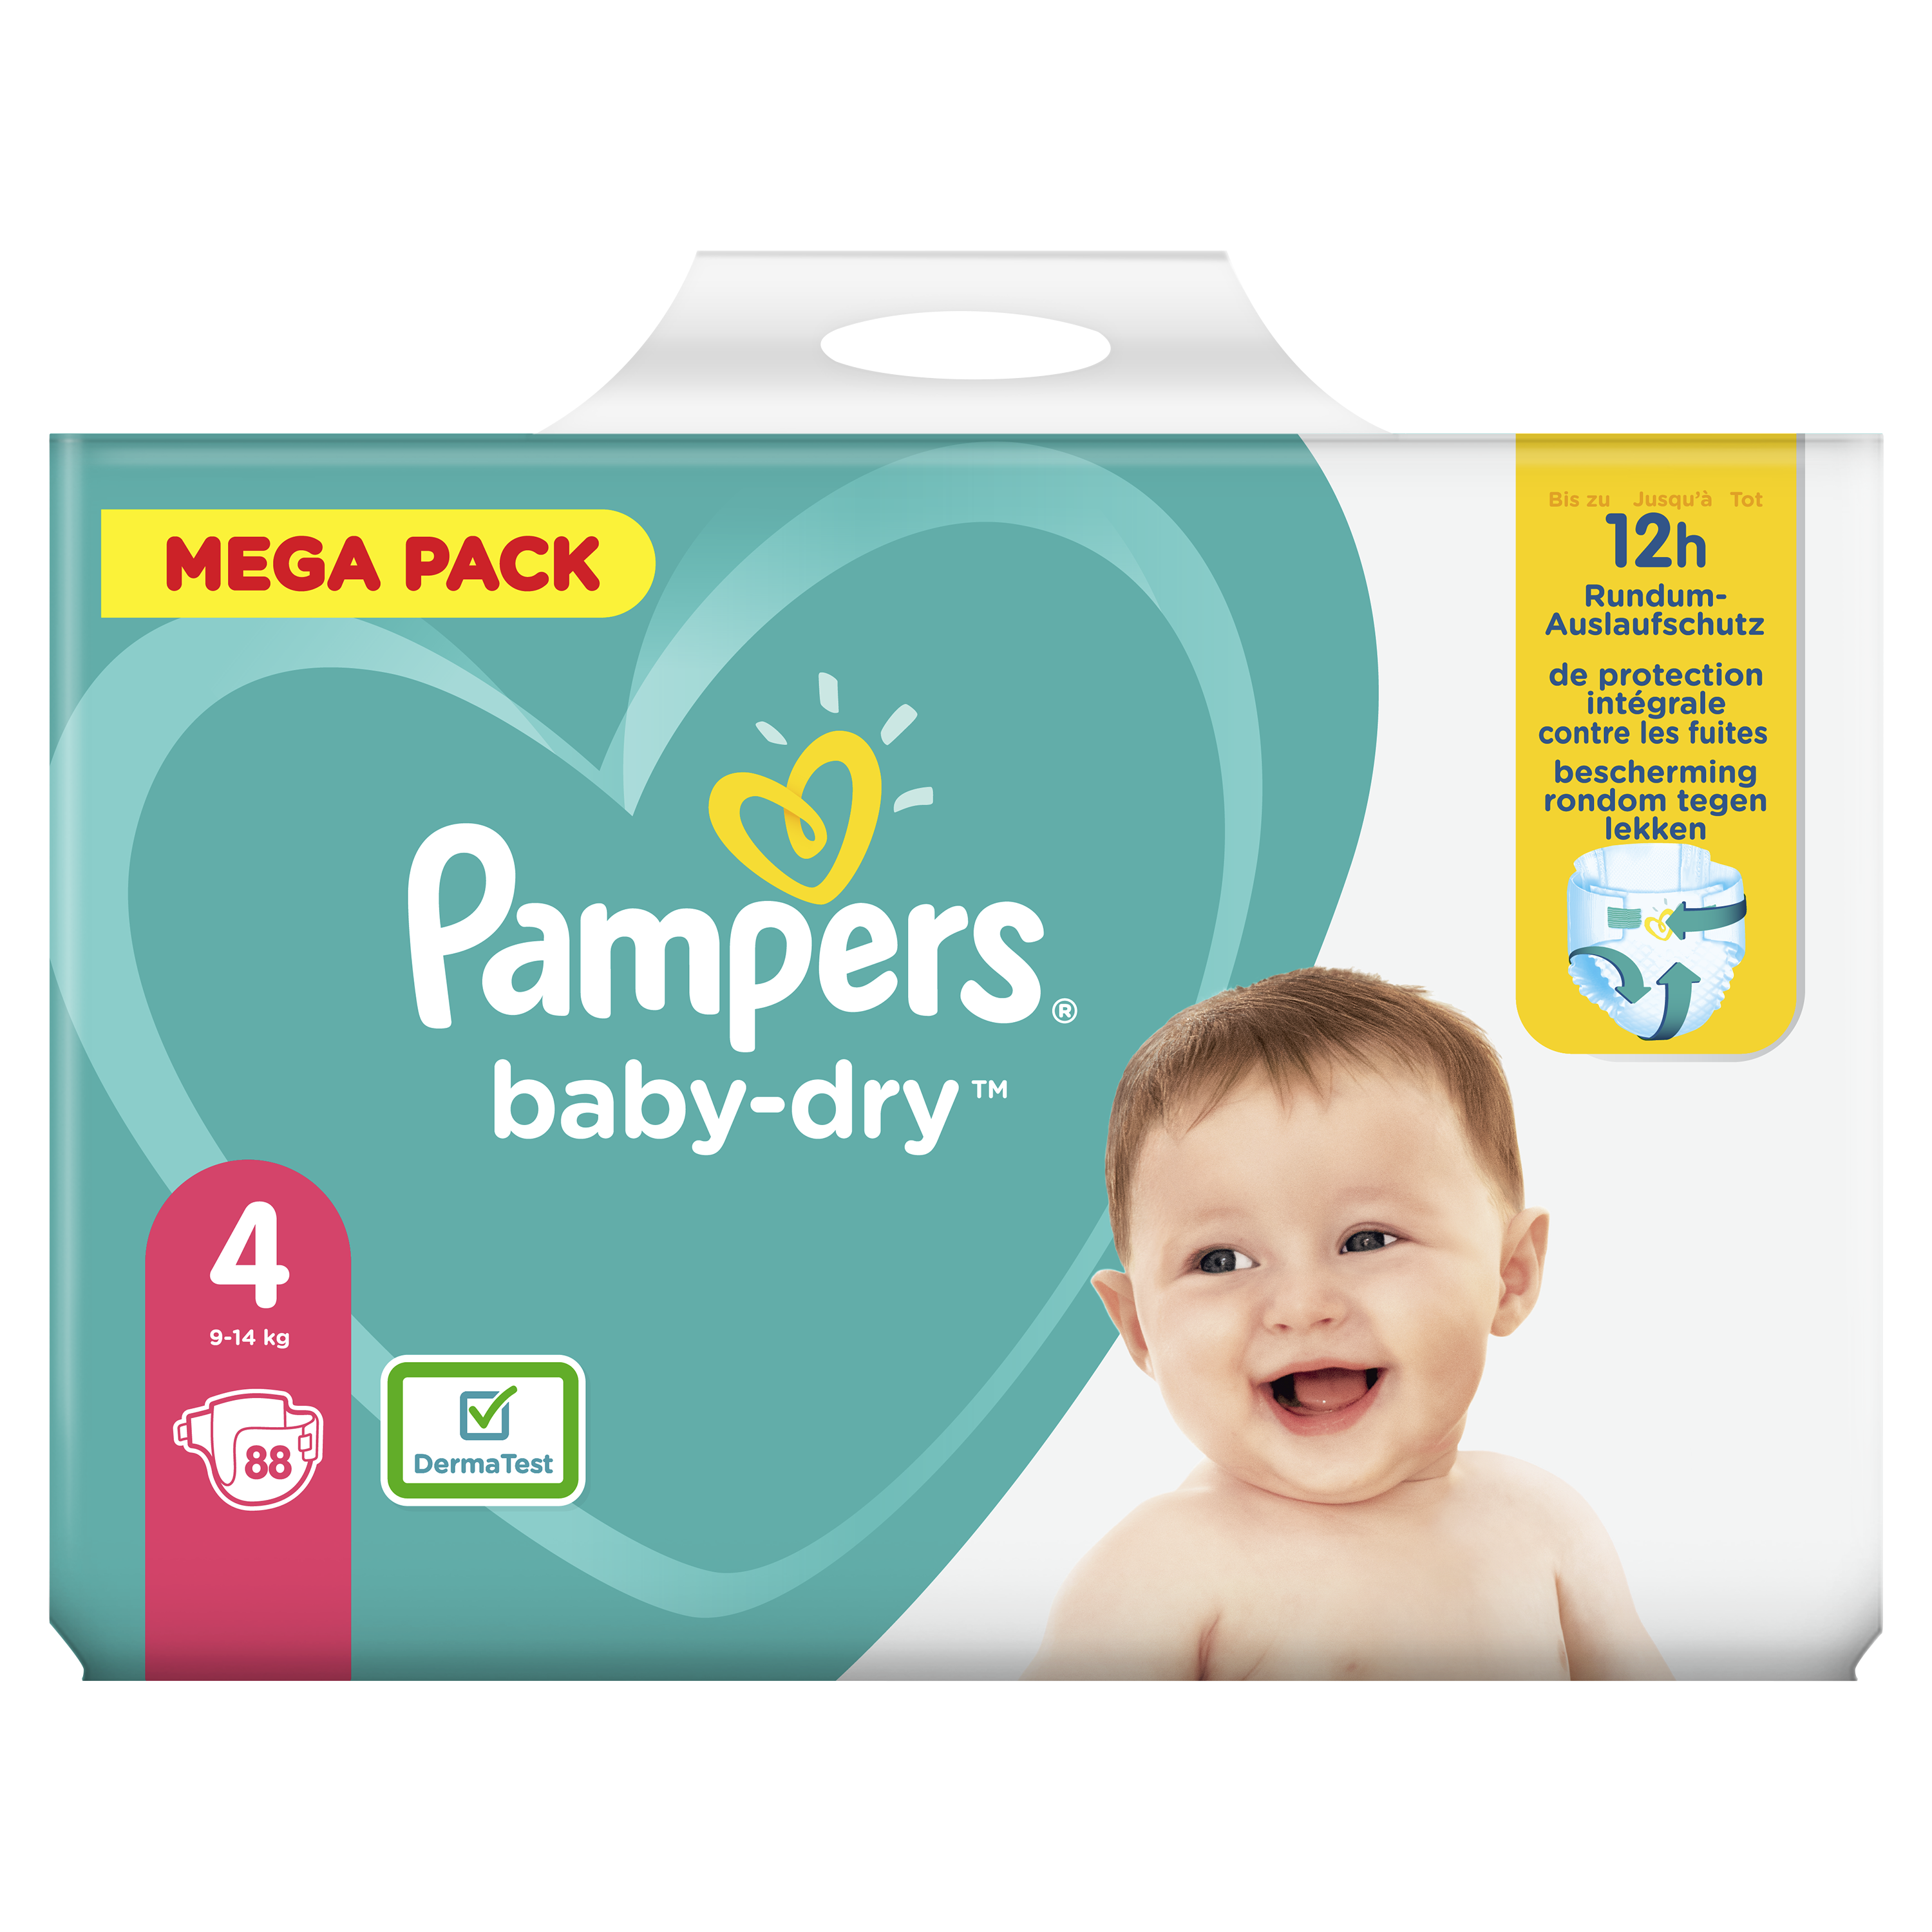 Pampers - Couches géant taille 4 - Supermarchés Match